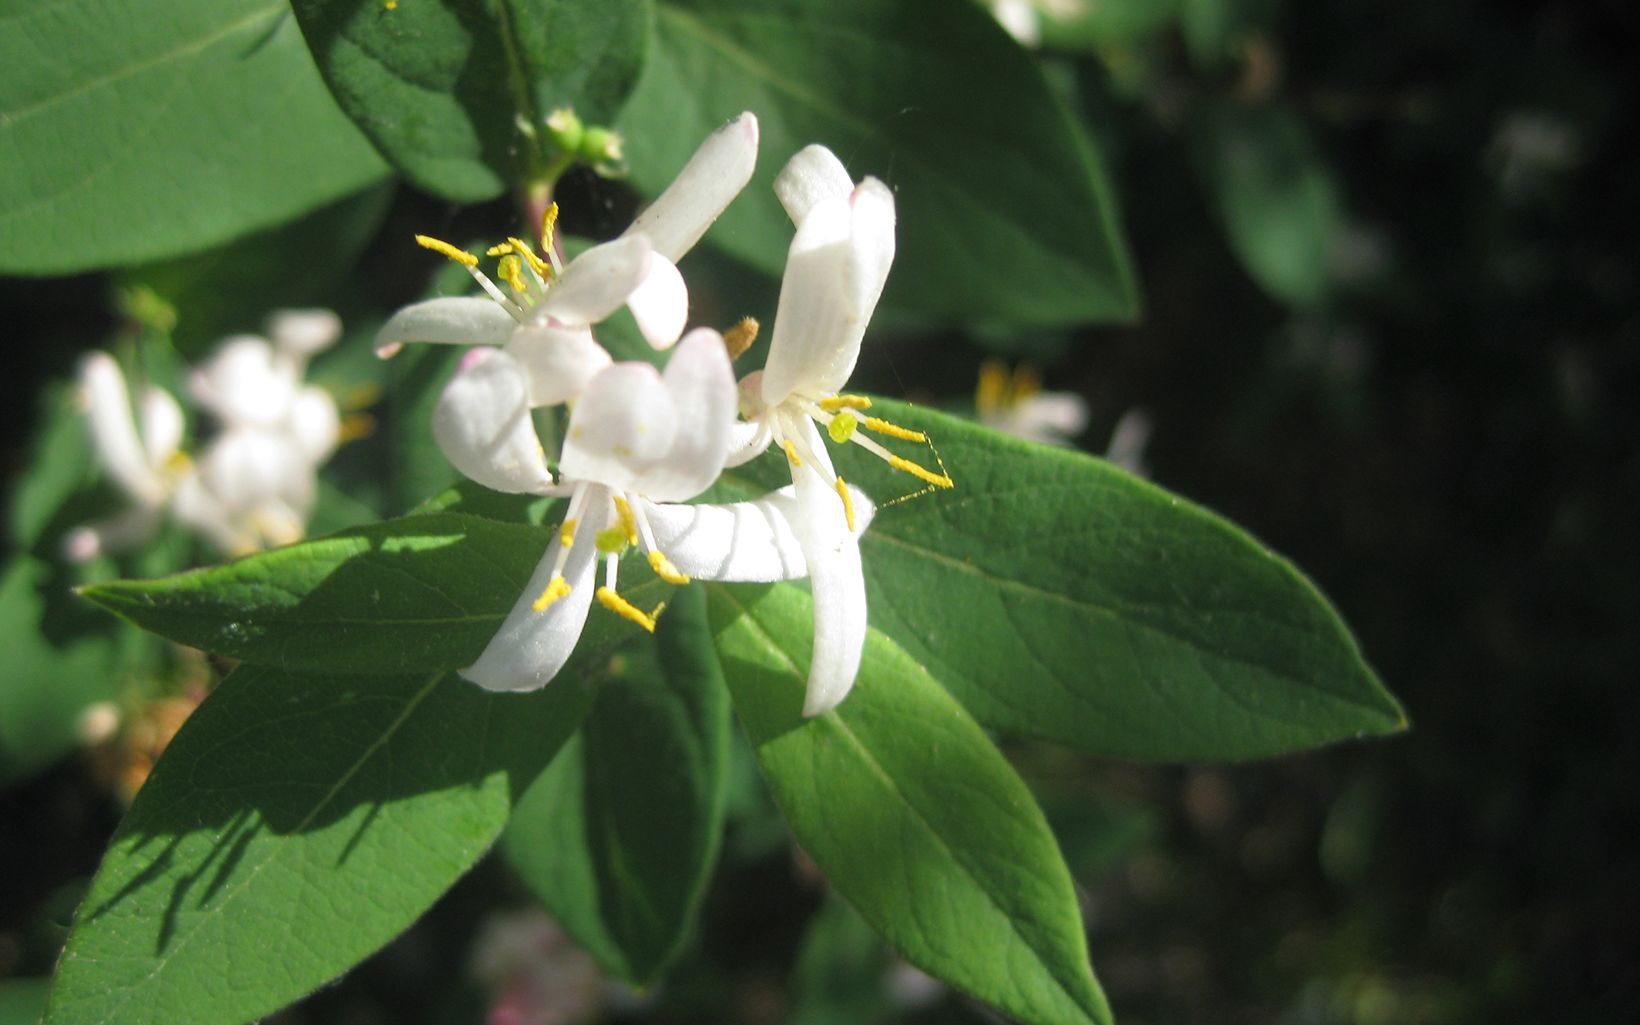 Invasive Bush honeysuckle native to northern China, Korea and parts of Japan and was introduced to the U.S. in 1897.